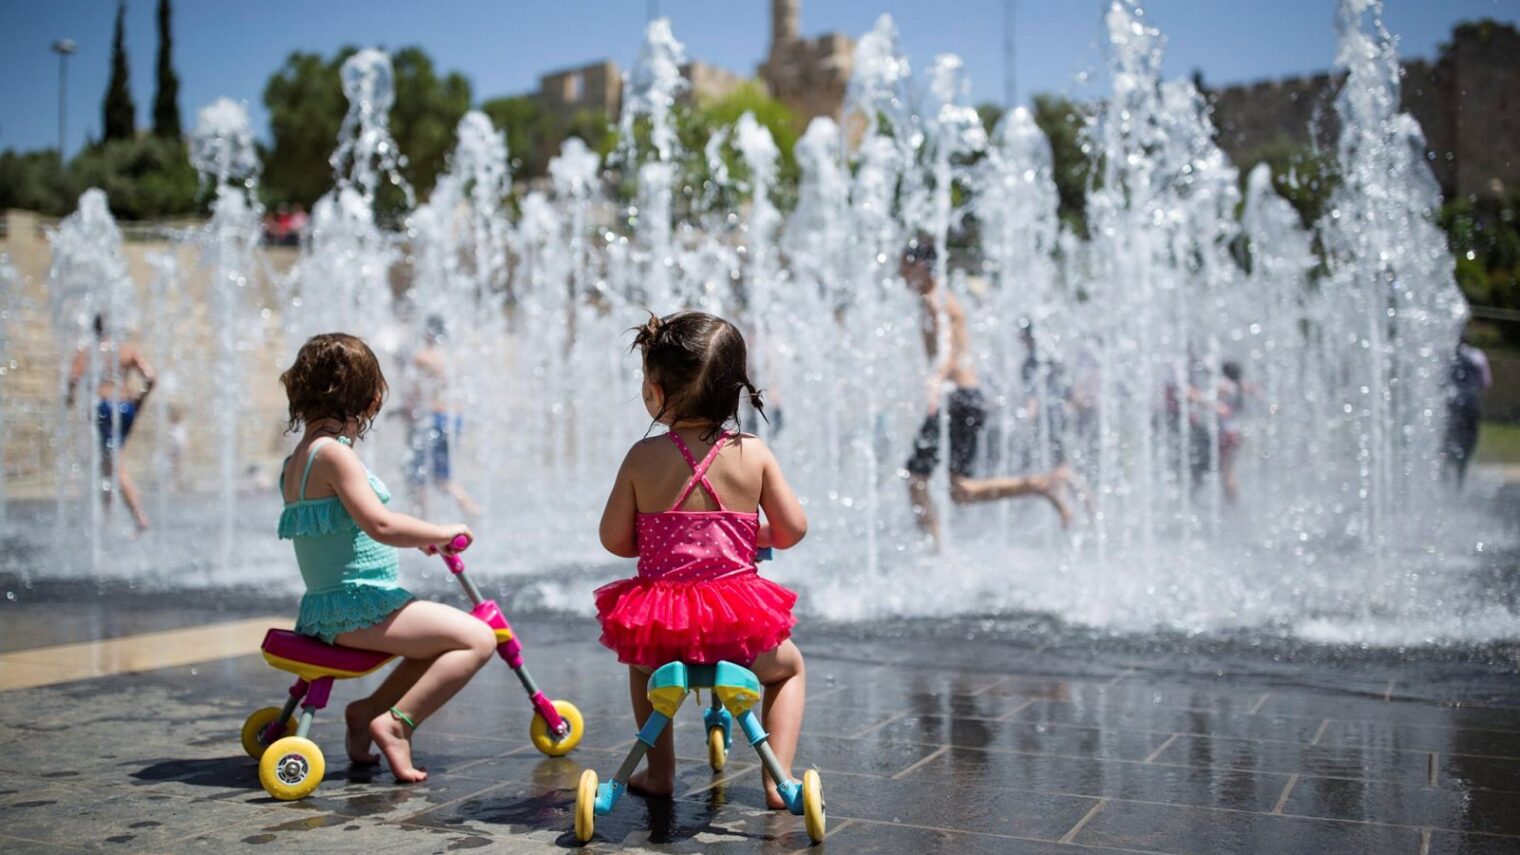 Fountains to splash in. Children play in a water fountain near the Tower of David in the Old City of Jerusalem. Photo by Corinna Kern/FLASH90